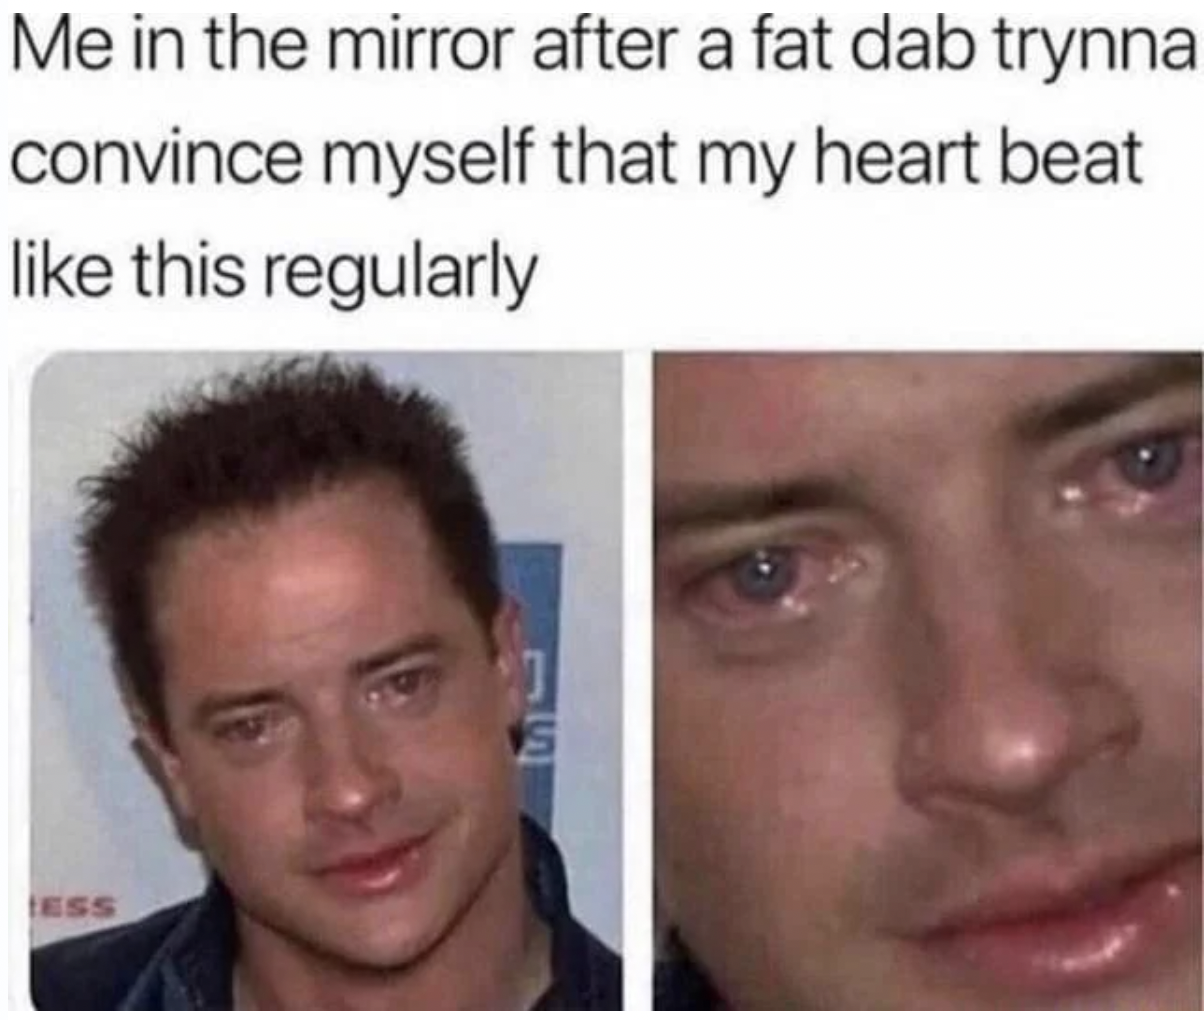 Dank Memes - brendan fraser sad meme - Me in the mirror after a fat dab trynna convince myself that my heart beat this regularly S Ess